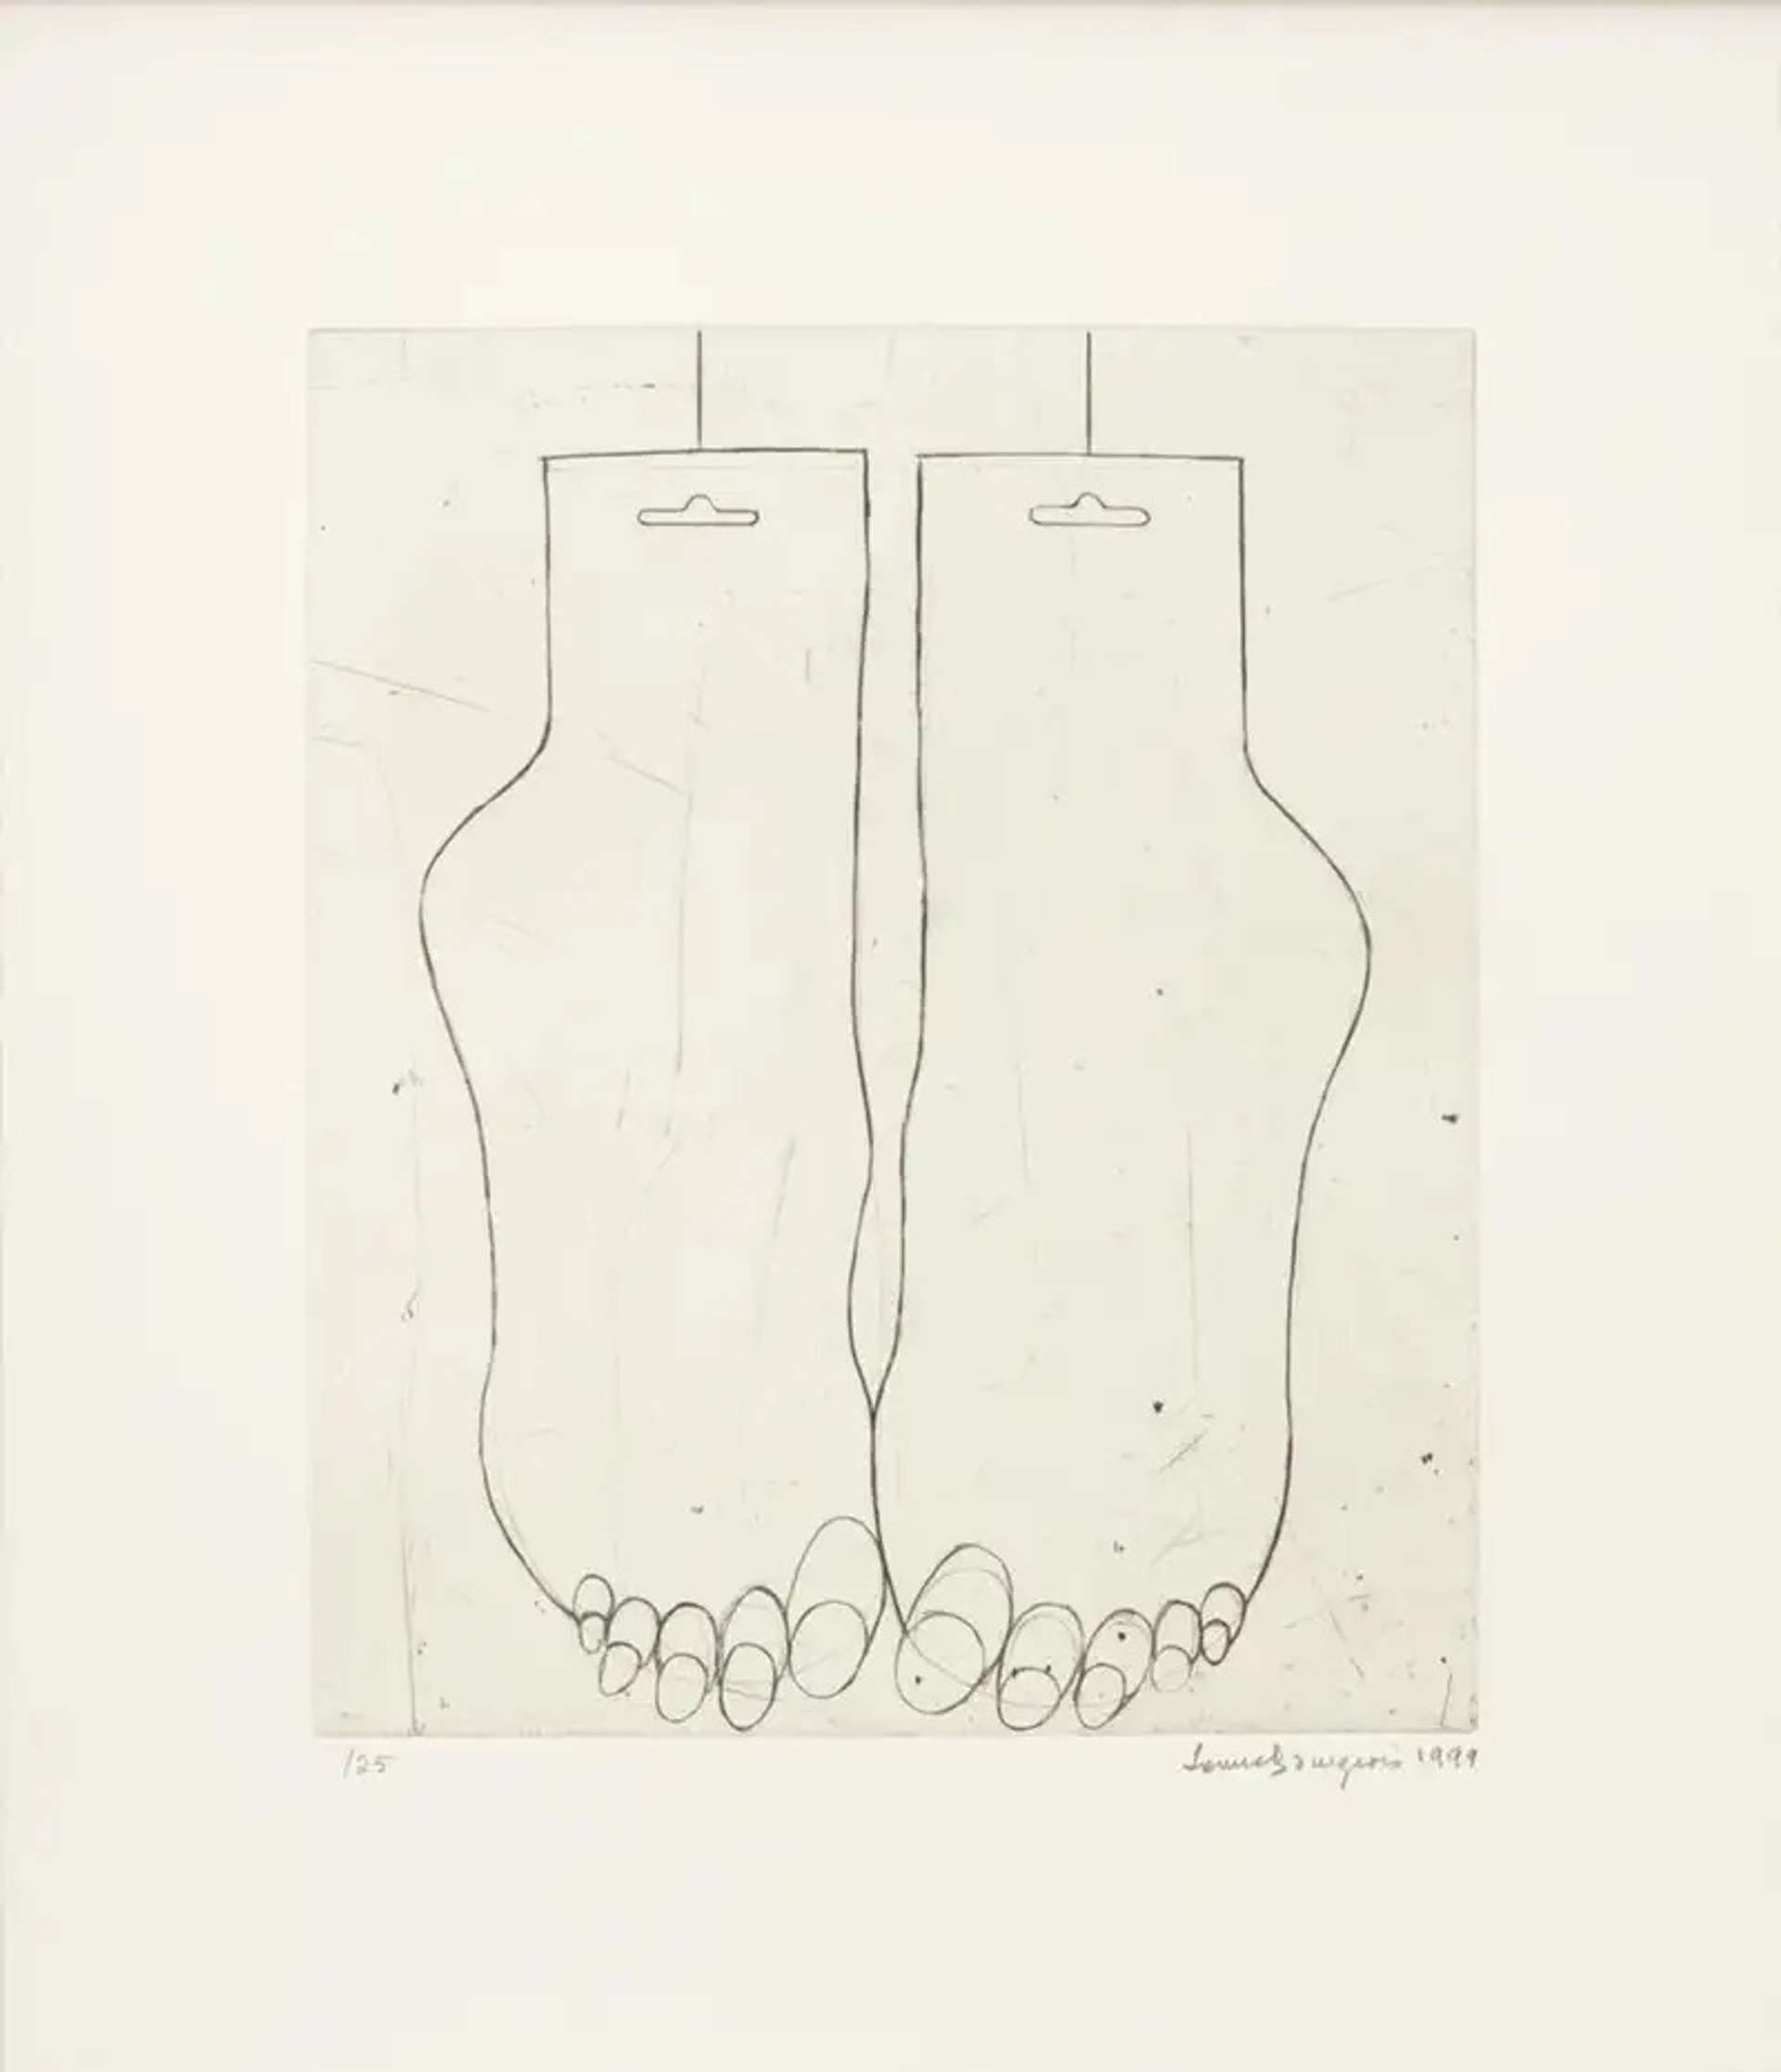 Louise Bourgeois’ Feet. A drypoint print of two feet, dangling pointing downwards. 